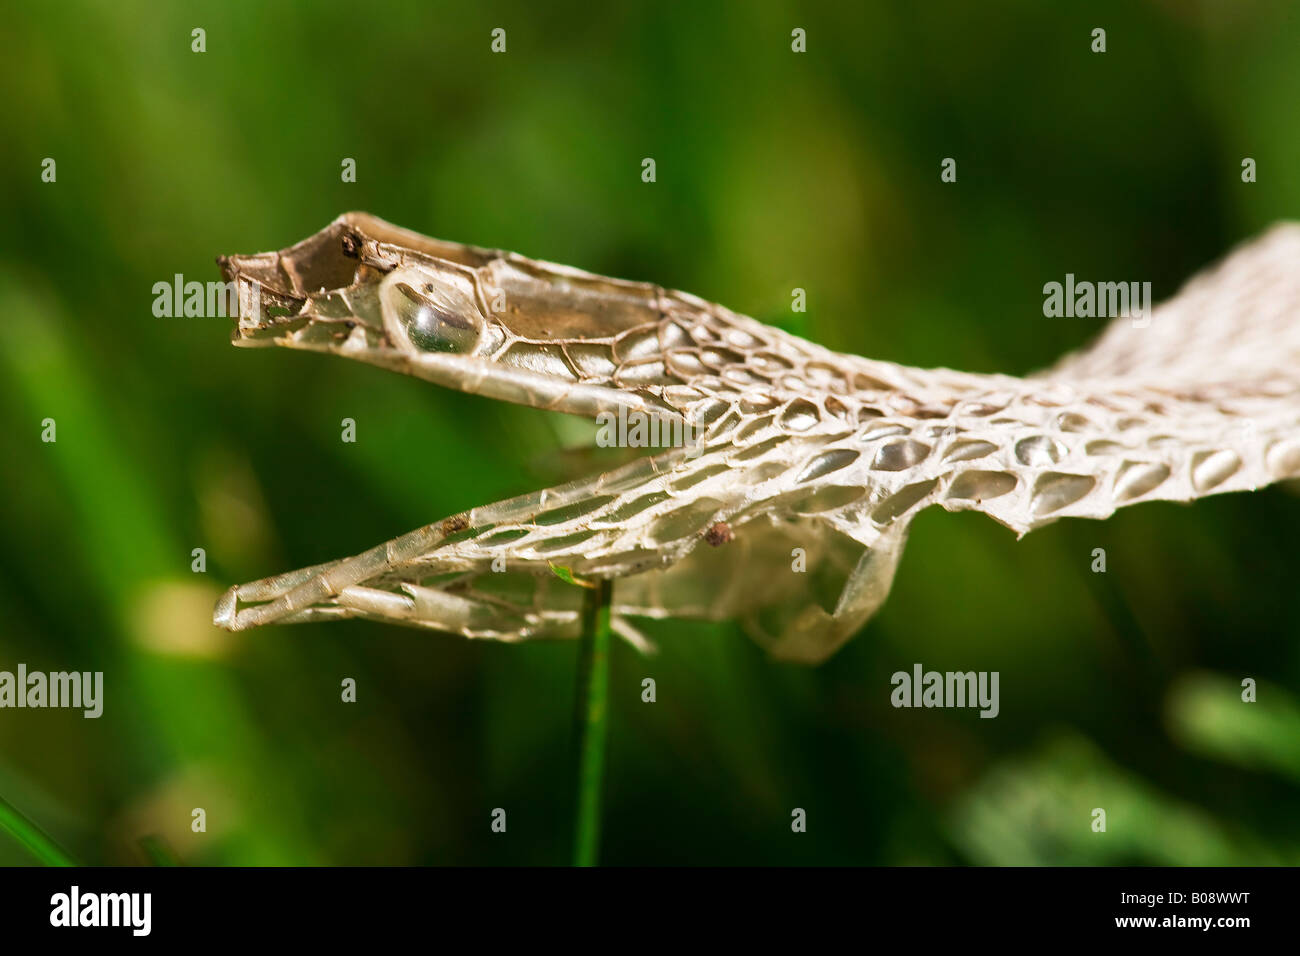 Closeup image of a snake skin head in the grass The mouth is open and the eye shield is clearly visible Stock Photo